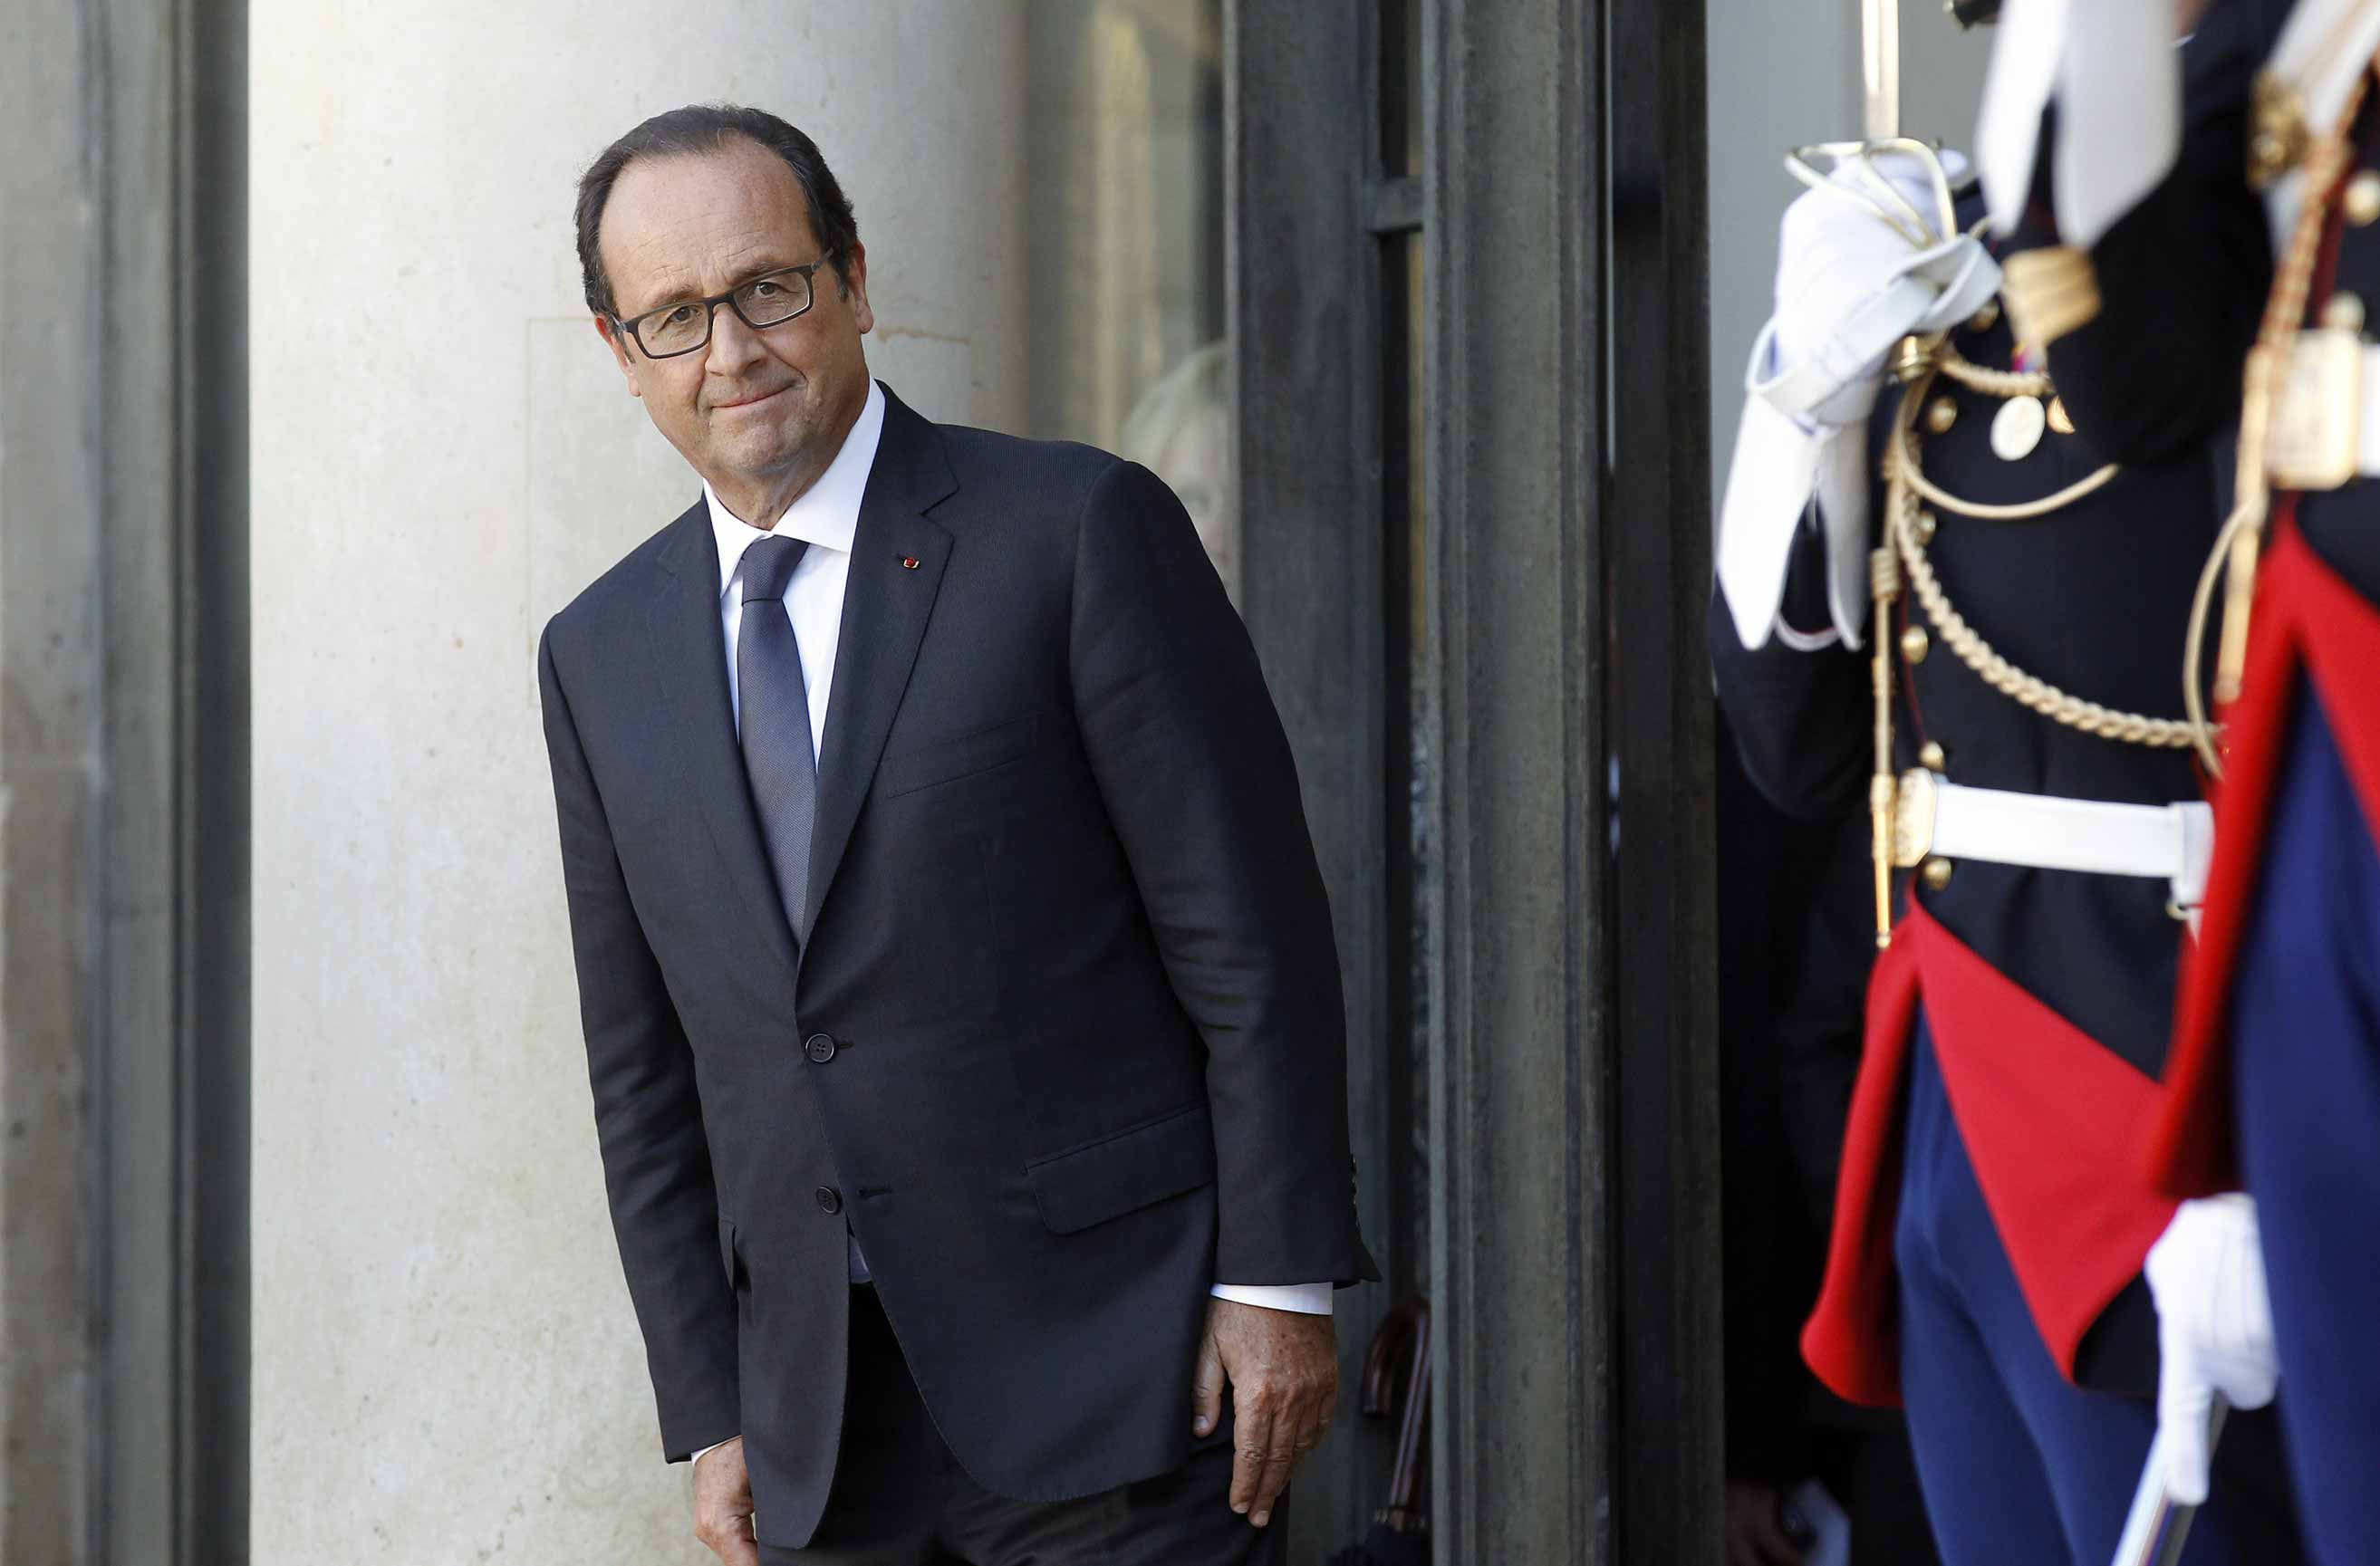 Hollande leaves the Élysée Palace after a press conference with his Czech counterpart, Milos Zeman, on Sept. 9 (Chesnot—Getty Images)